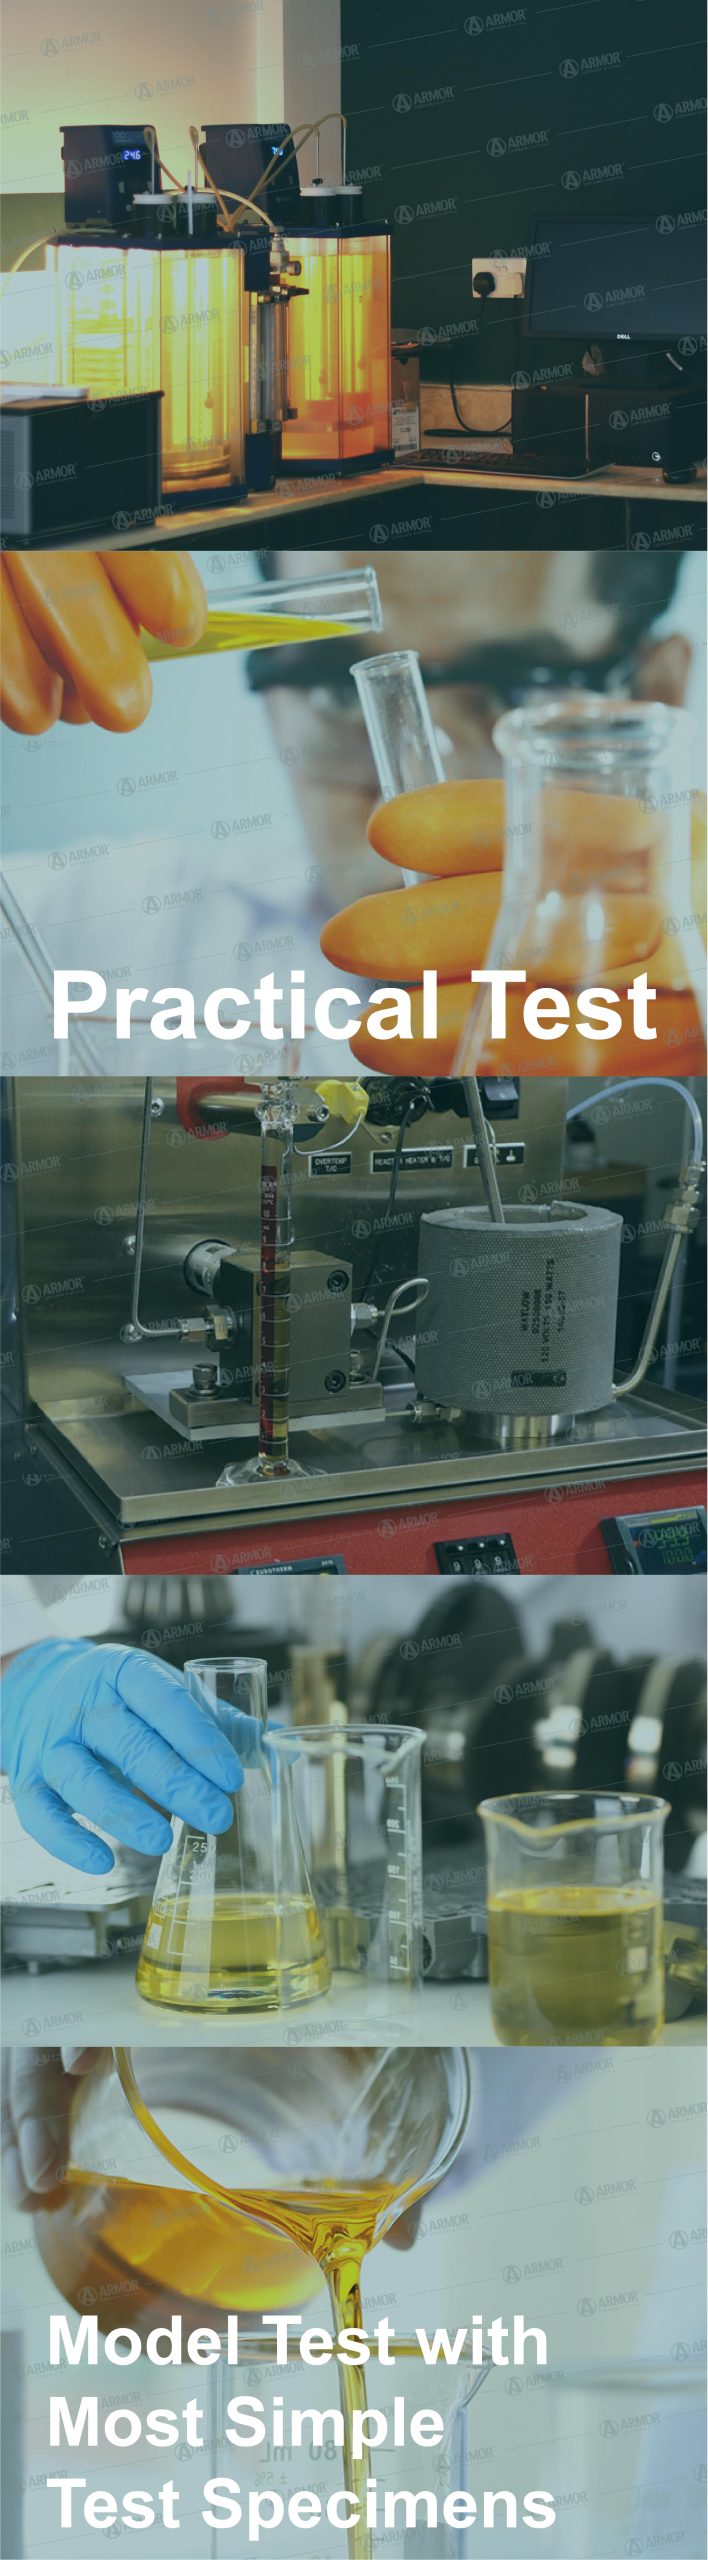 Lubricants tests for screening performance